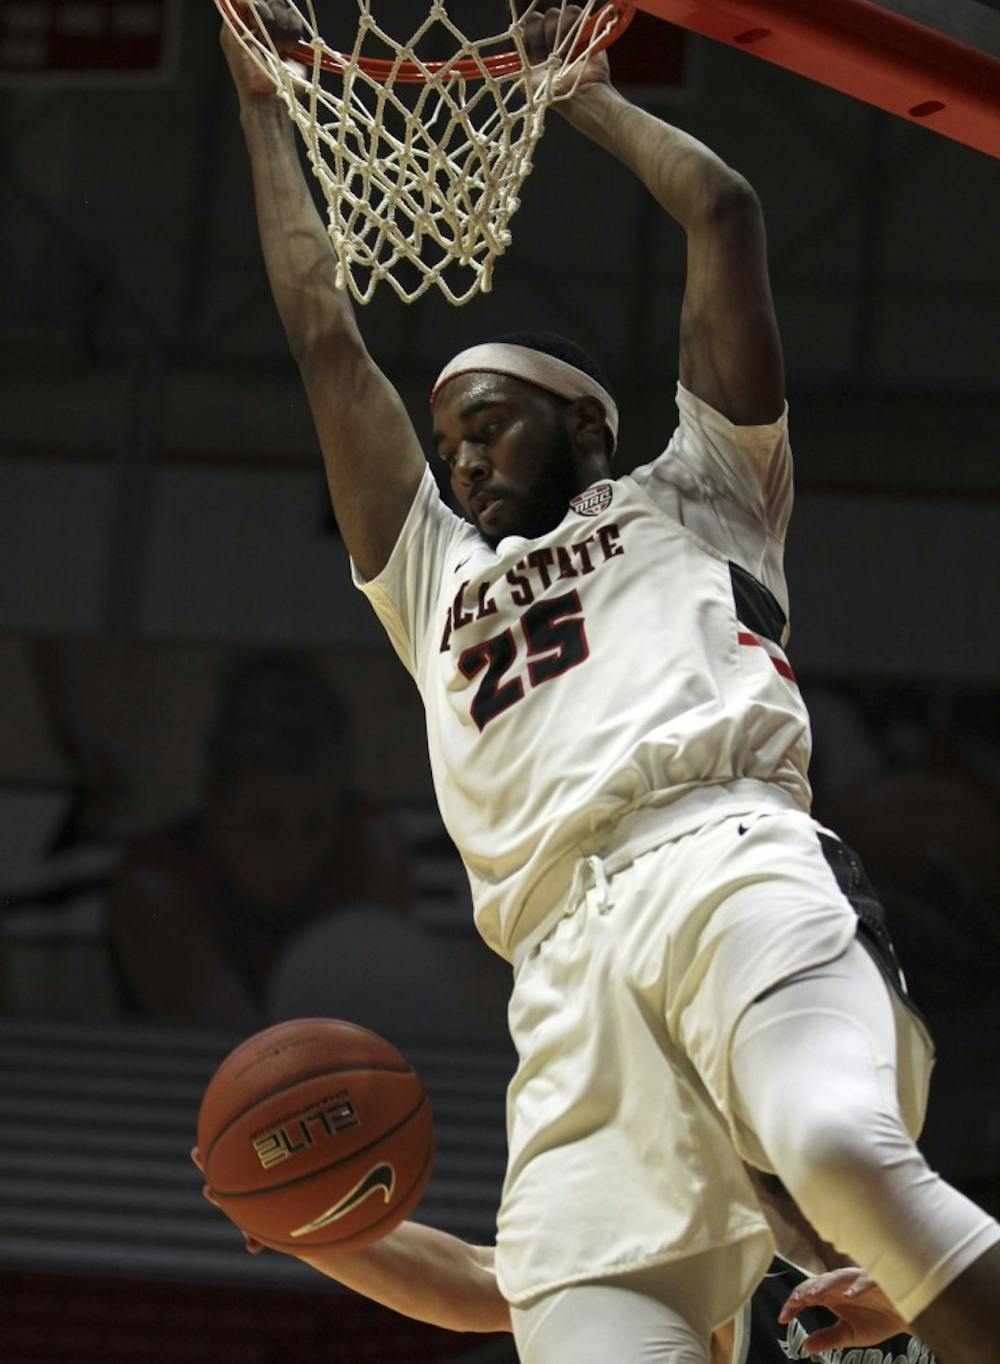 <p>Ball State junior forward Tahjai Teague dunks the ball during the Cardinals' exhibition game against University of Indianapolis Nov. 2, 2018, in John E. Worthen Arena. Teague scored 20 points. <strong>Paige Grider, DN</strong></p>